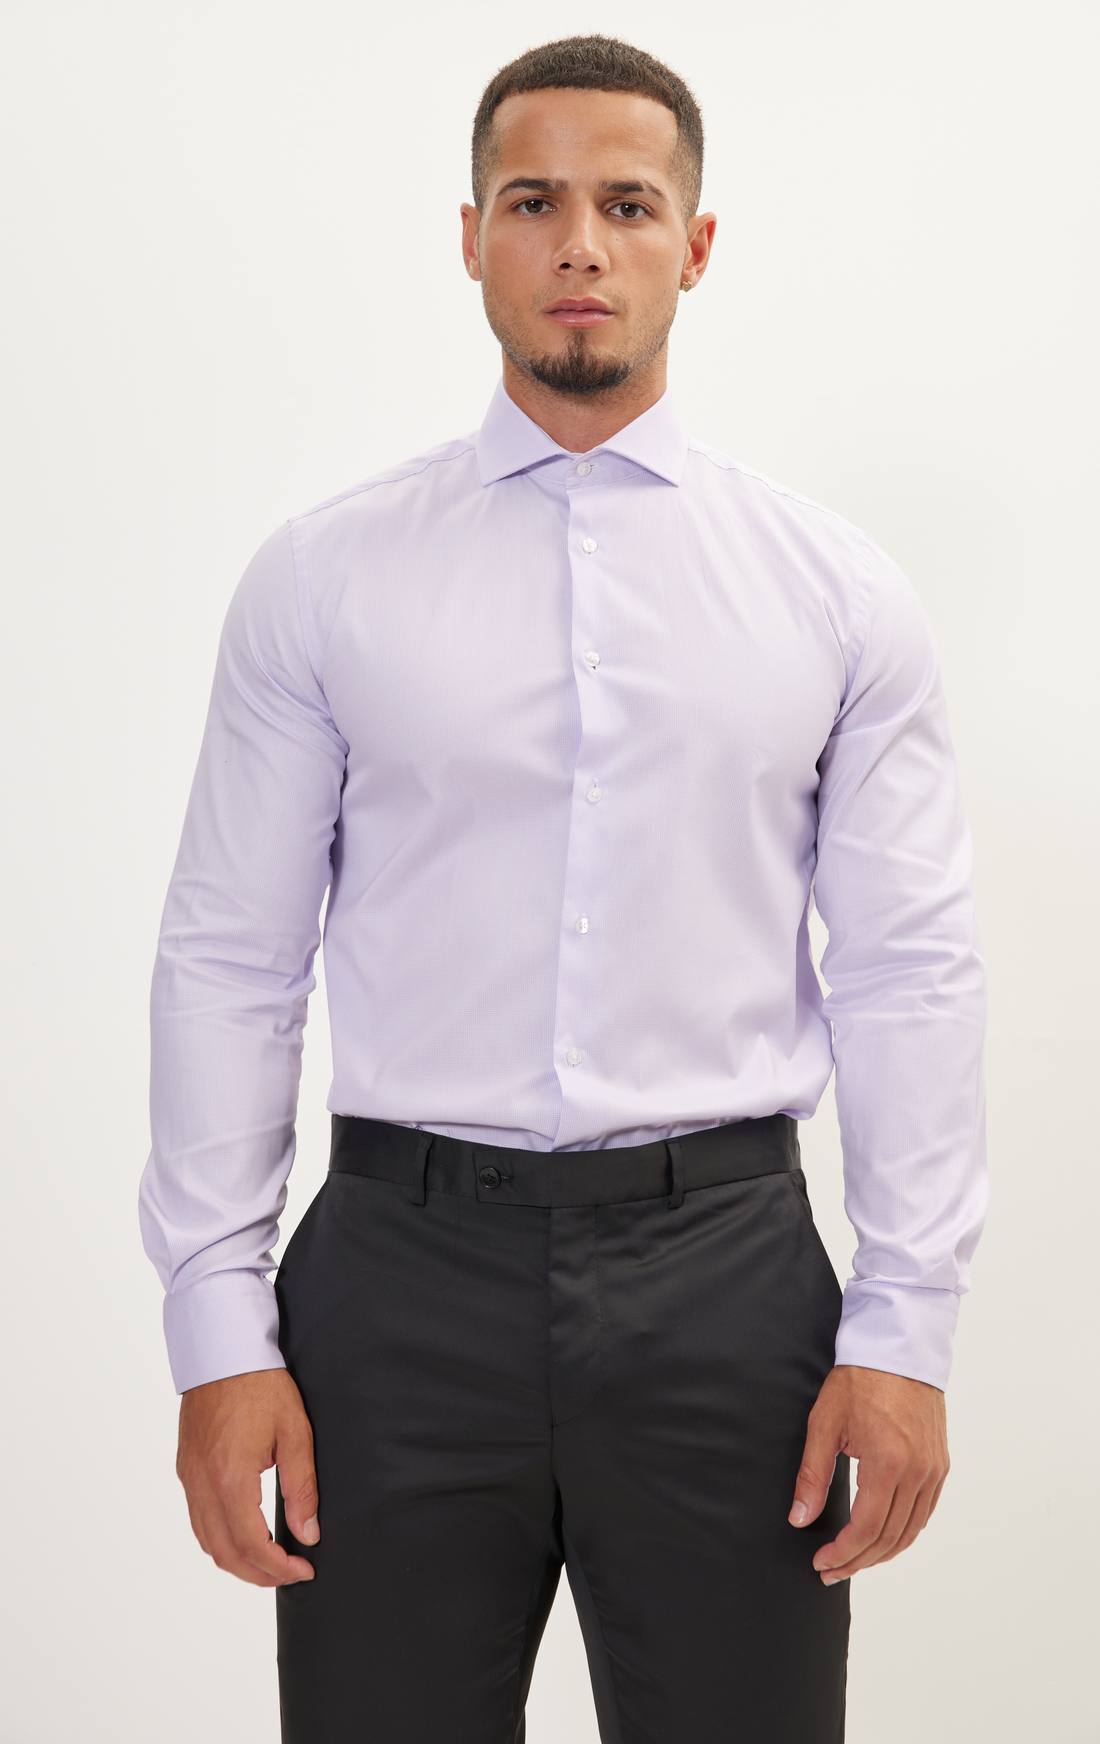 N° AN4902 PURE COTTON FRENCH PLACKET SPREAD COLLAR DRESS SHIRT - LILAC HOUNDSTOOTH